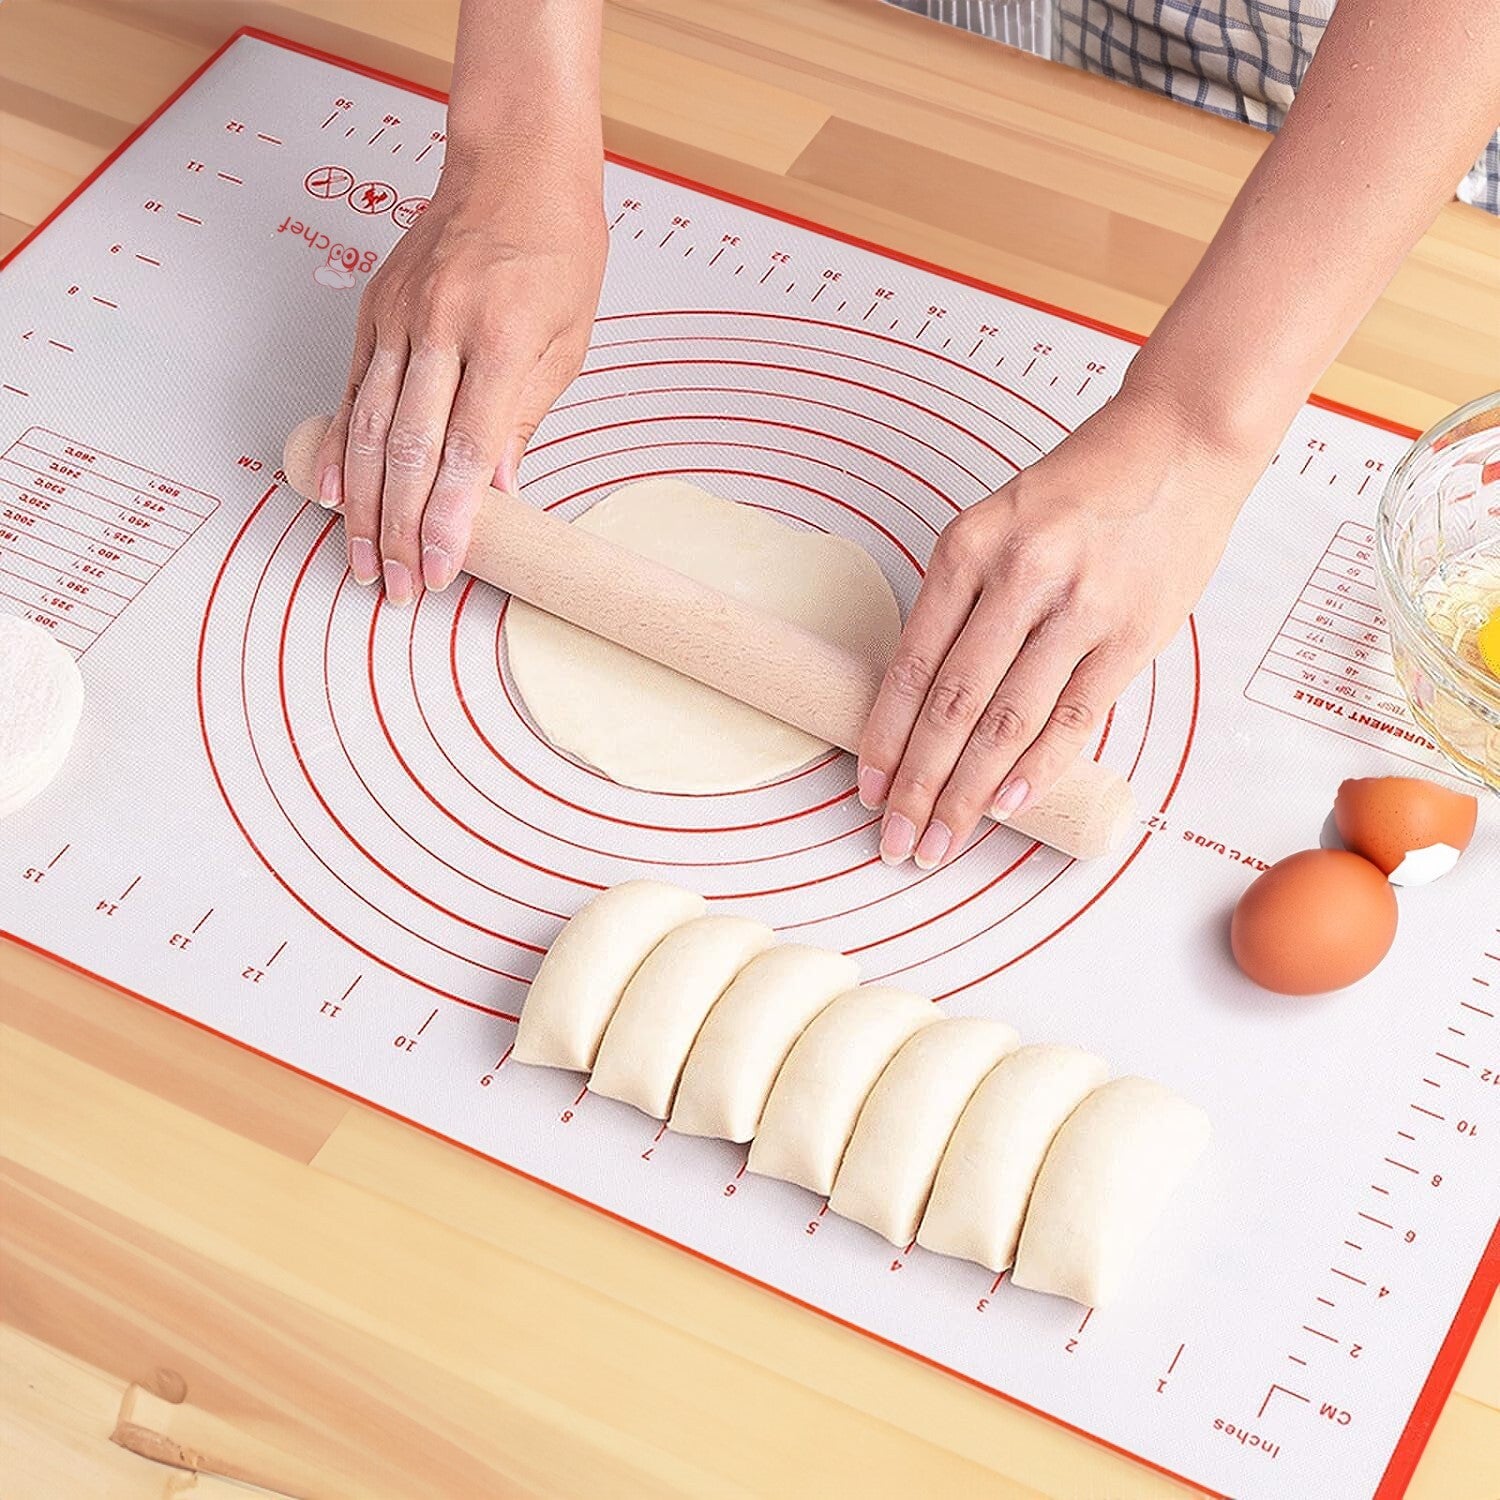 GooChef Silicone Pastry Baking Mat 16 x 24 - Non-Stick, Heat-Resistant, Dishwasher-Safe, Dough Rolling Oven Liner Mat by Renewgoo